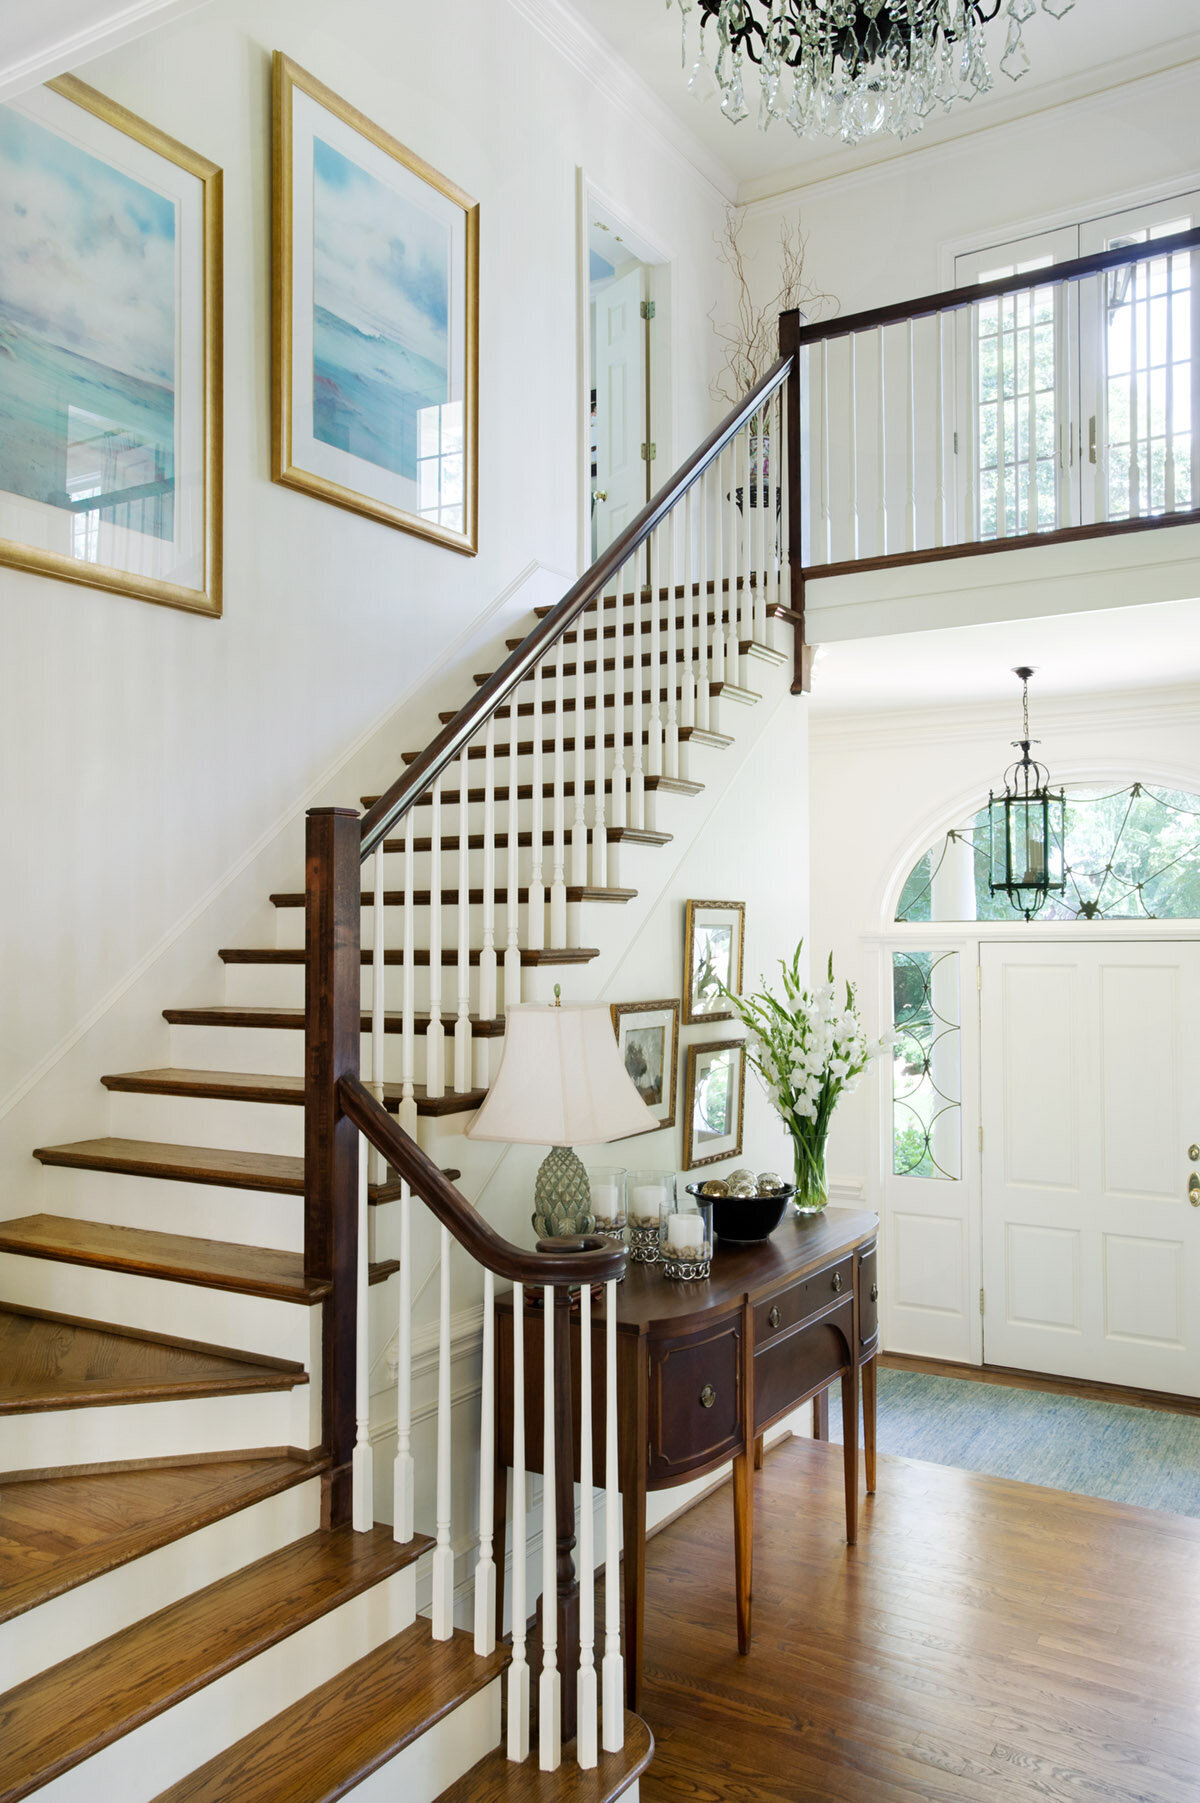 Panageries Residential Interior Design | Traditional Georgian Manse Staircase to Entry